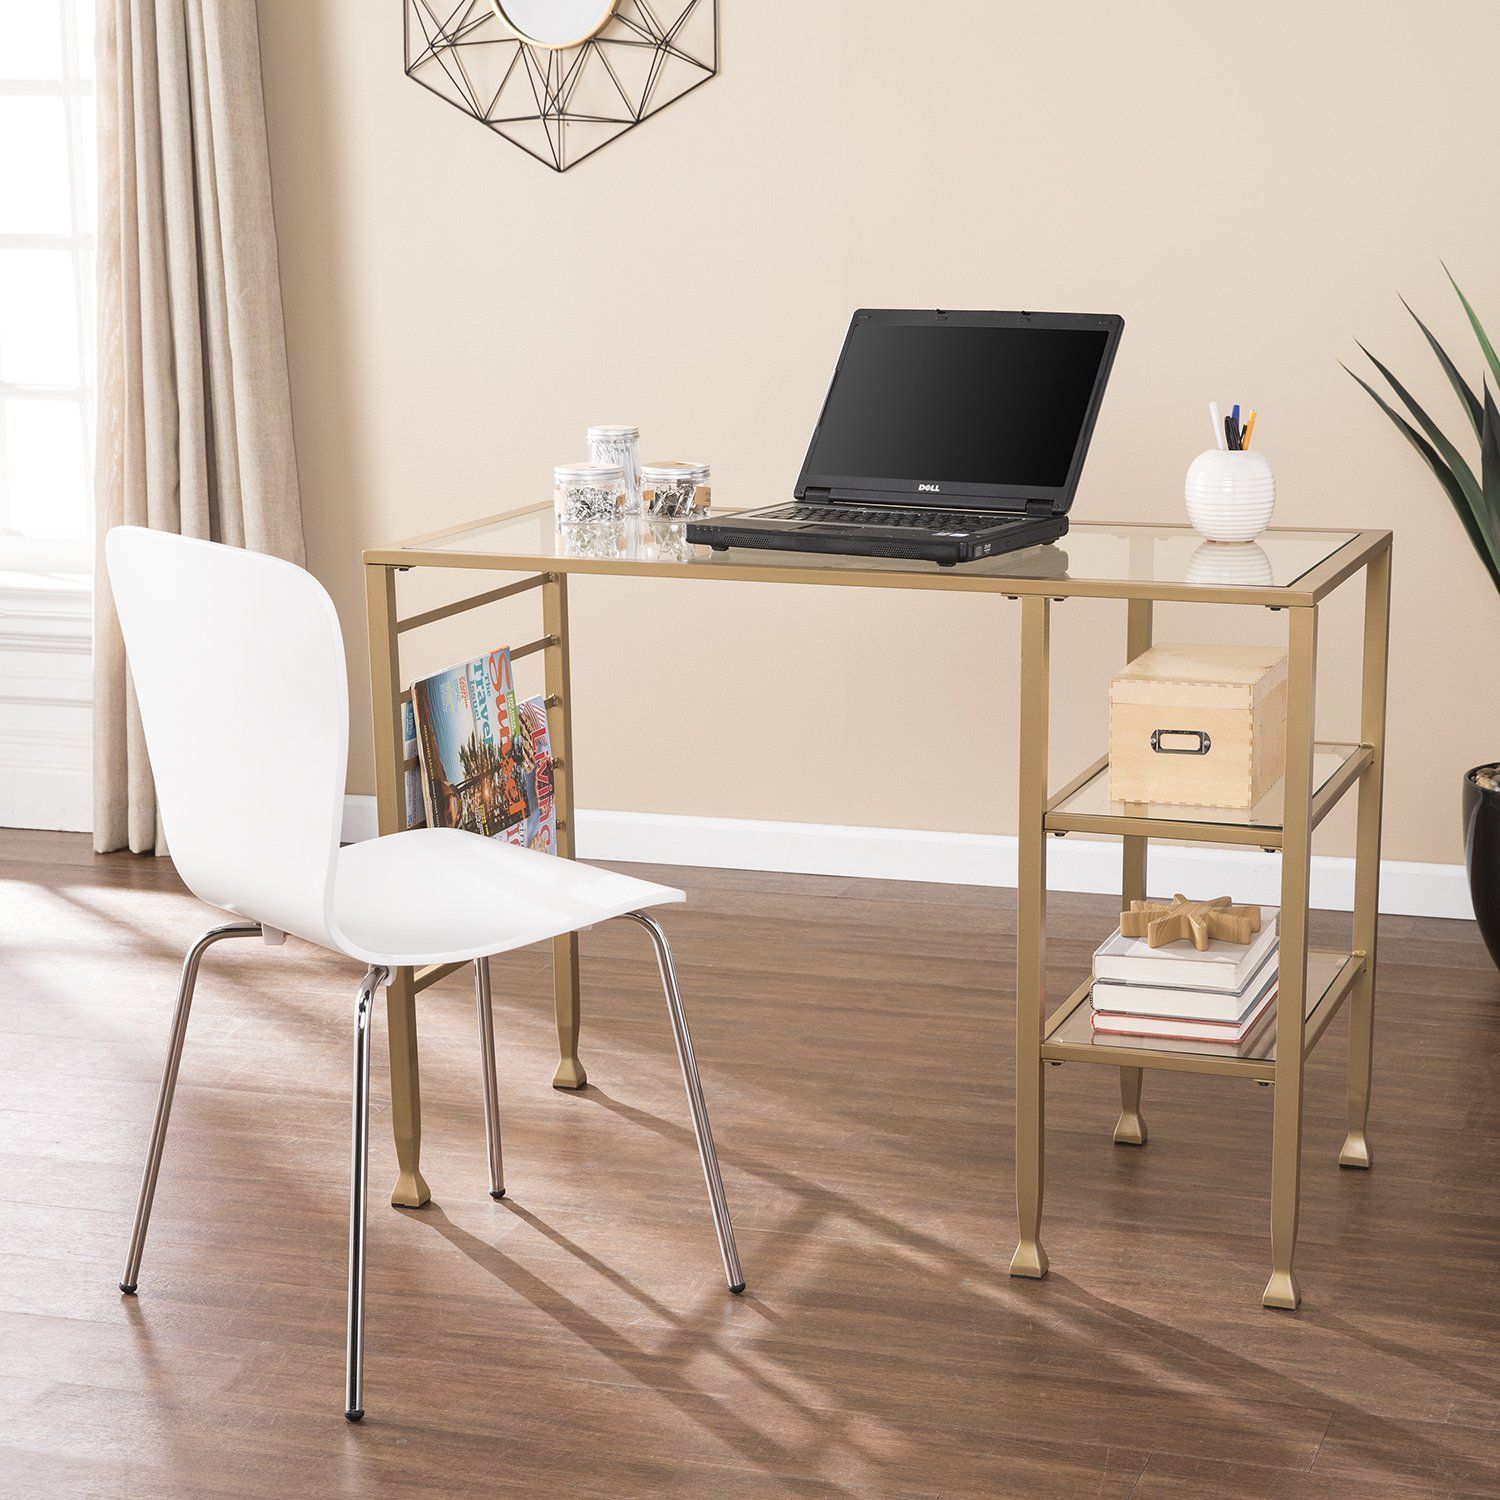 Amazon: Gold Writing Table Glam Writing Desk: Kitchen & Dining Pertaining To Glass And Walnut Modern Writing Desks (View 15 of 15)